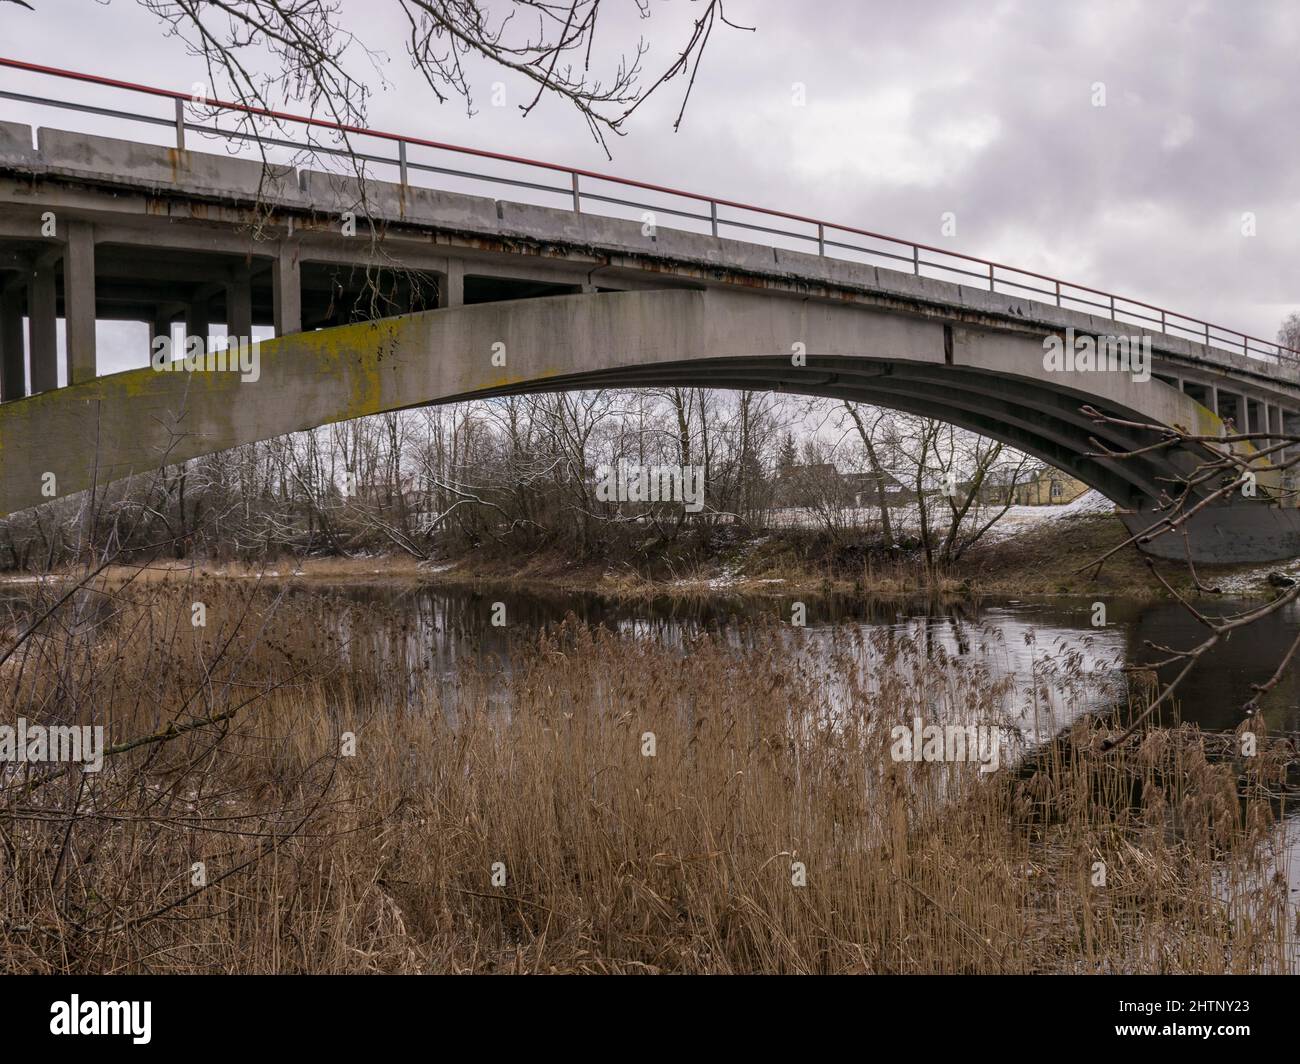 concrete arched bridge over a small and wild river, overgrown with shrubs, withered branches and old grass Stock Photo